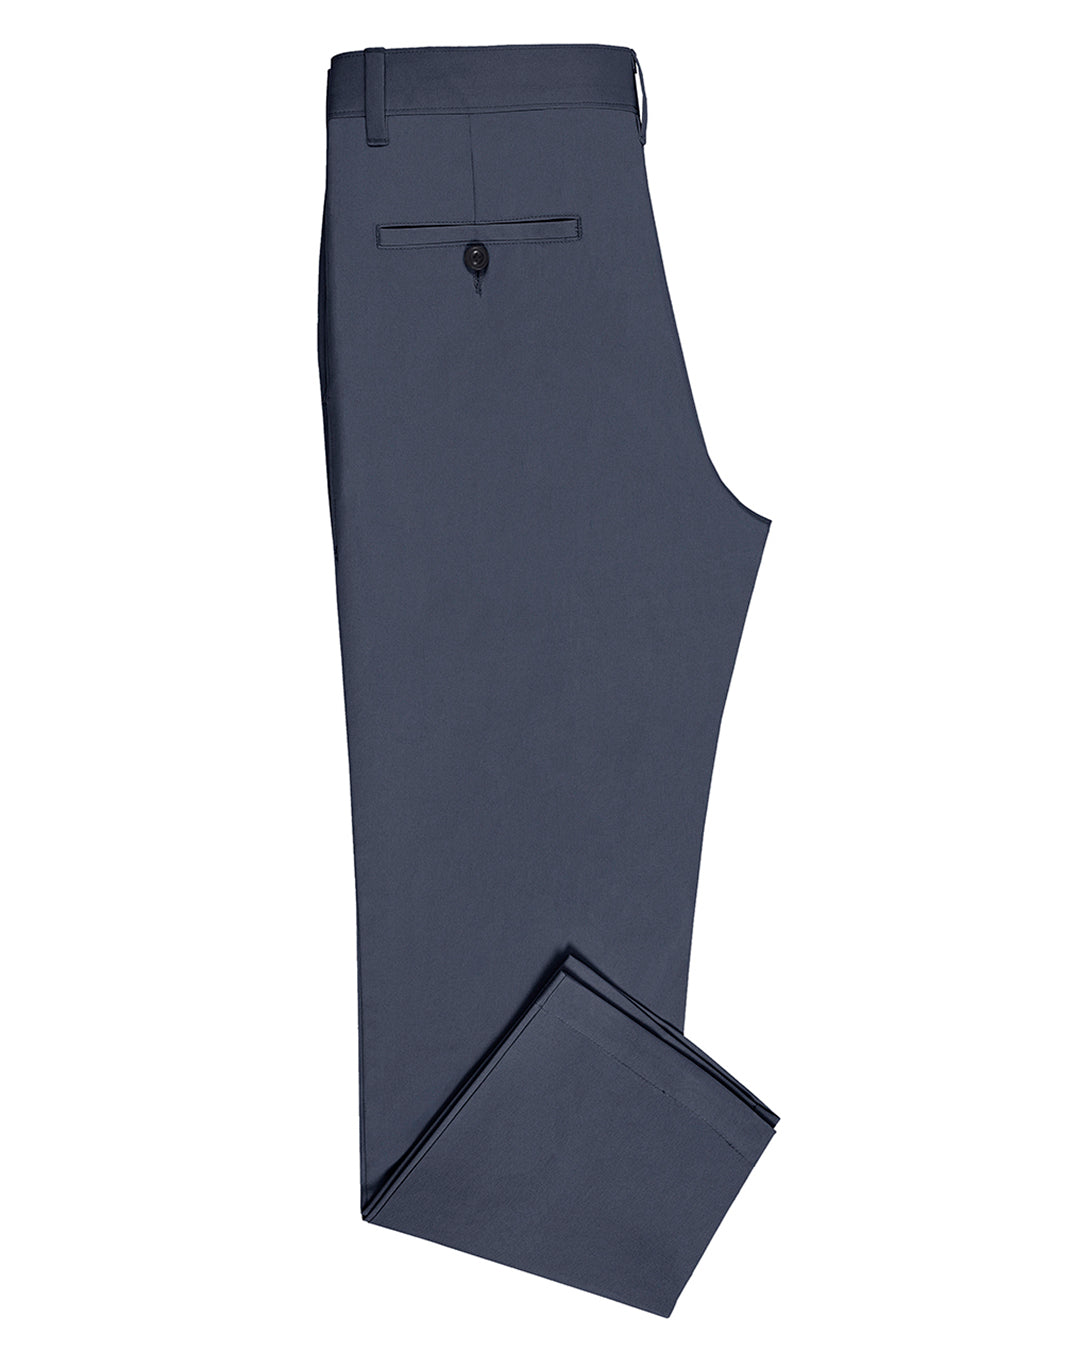 Side view of custom Genoa Chino pants for men by Luxire in grey